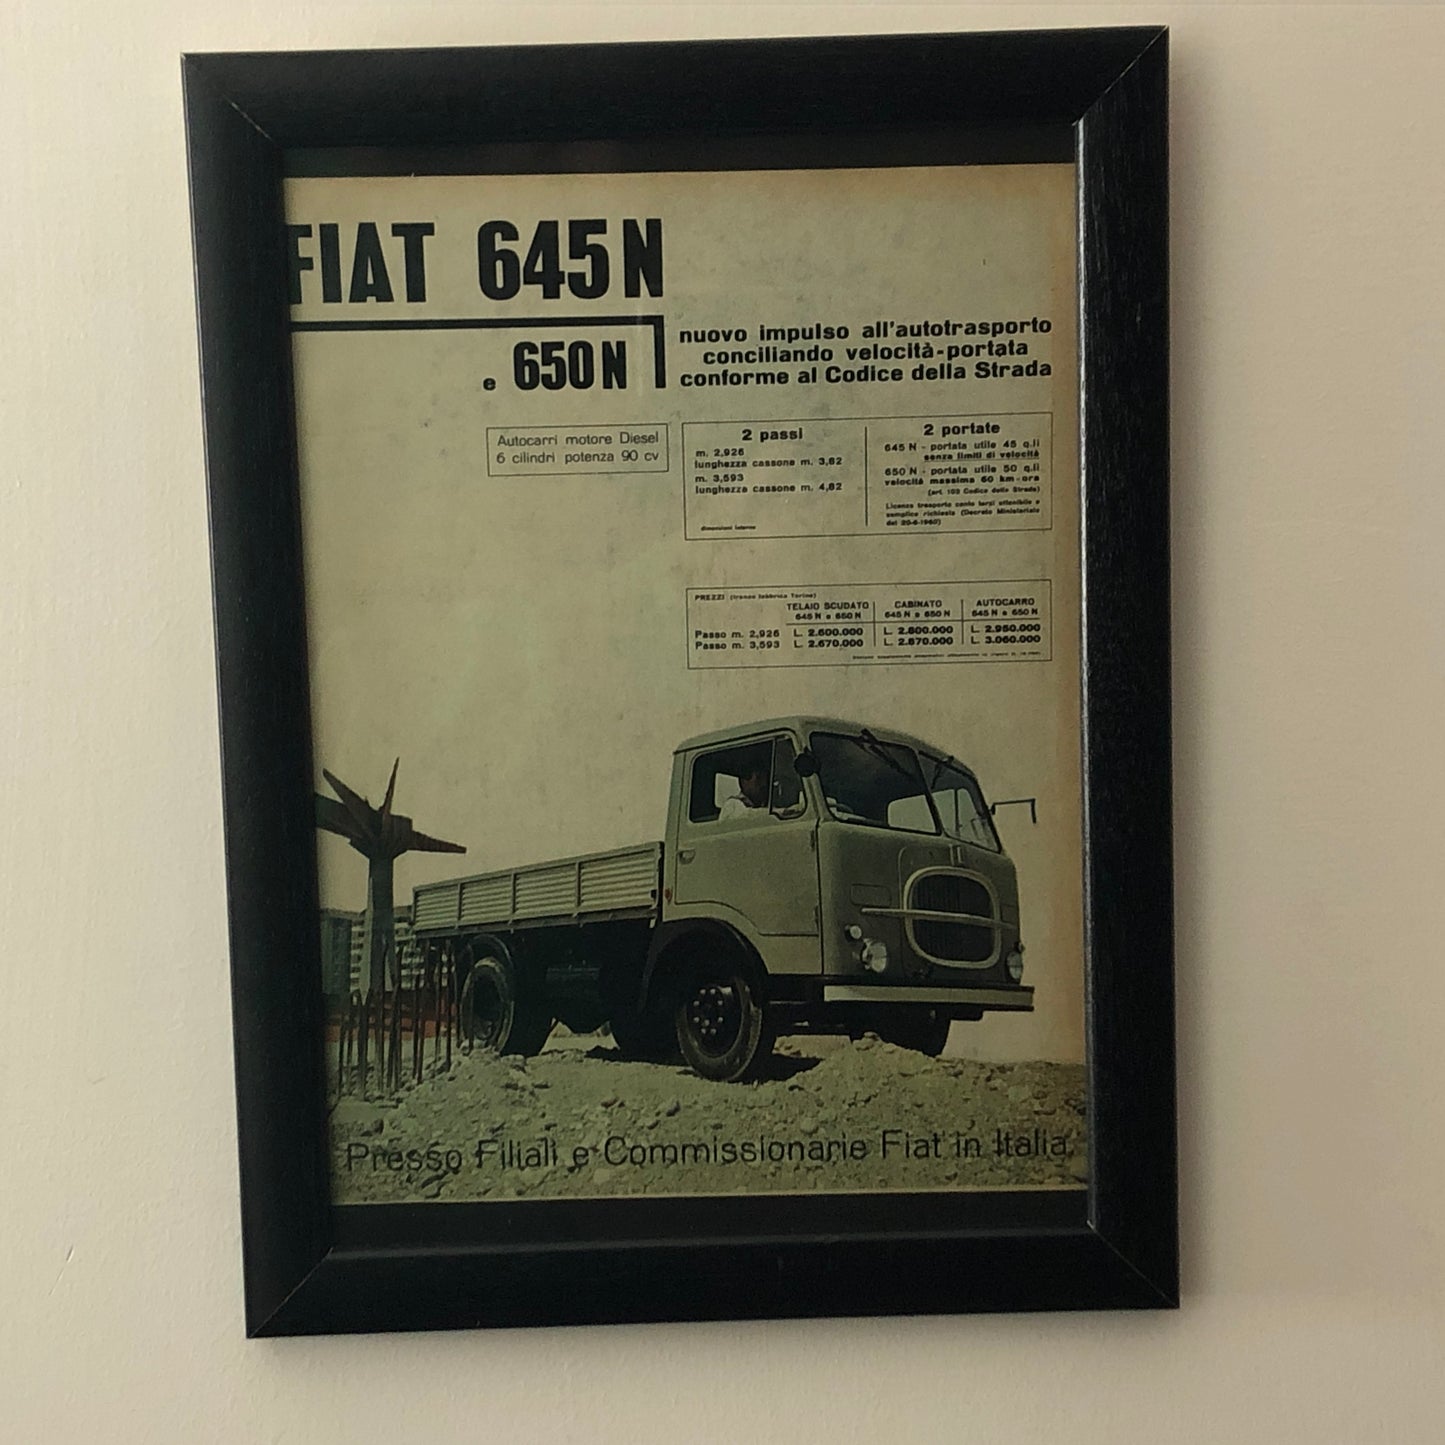 FIAT, 1960 FIAT 645 N and 650 N Advertisement with Italian Caption